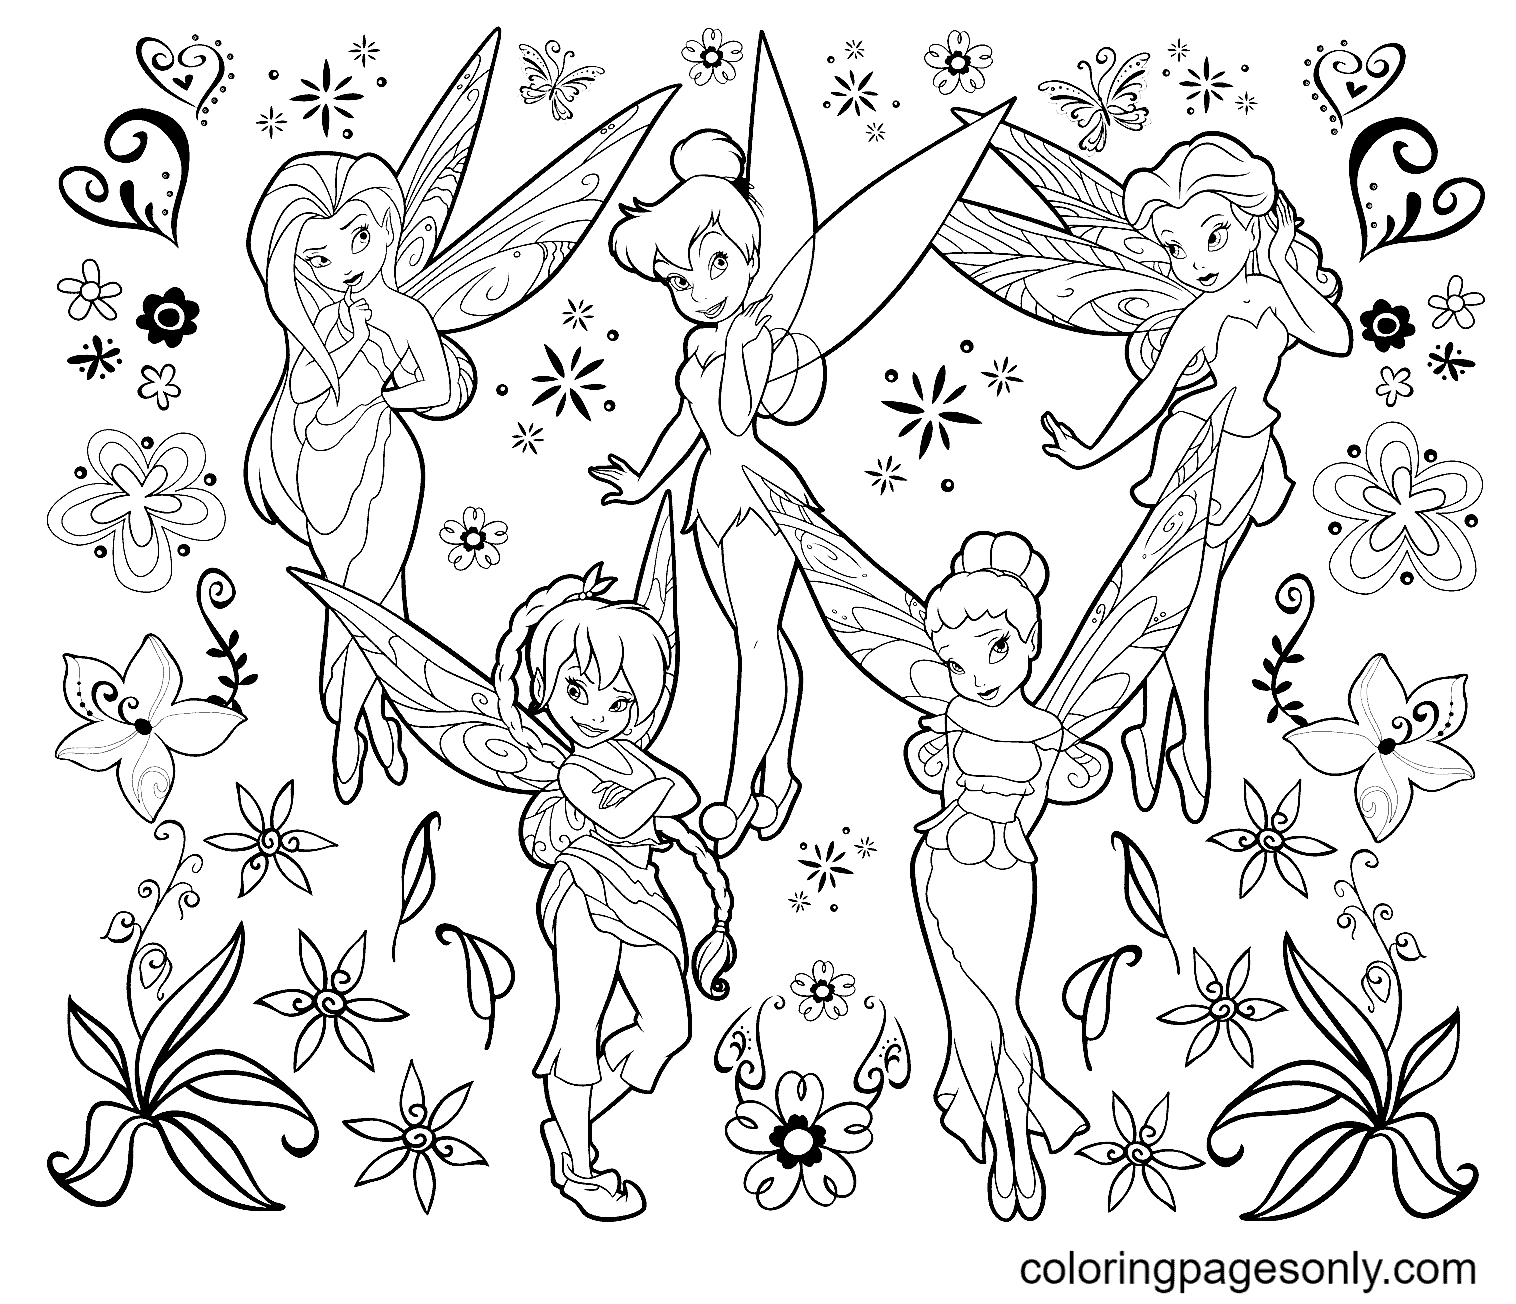 Tinkerbell and Beautiful Fairy Disney Coloring Page